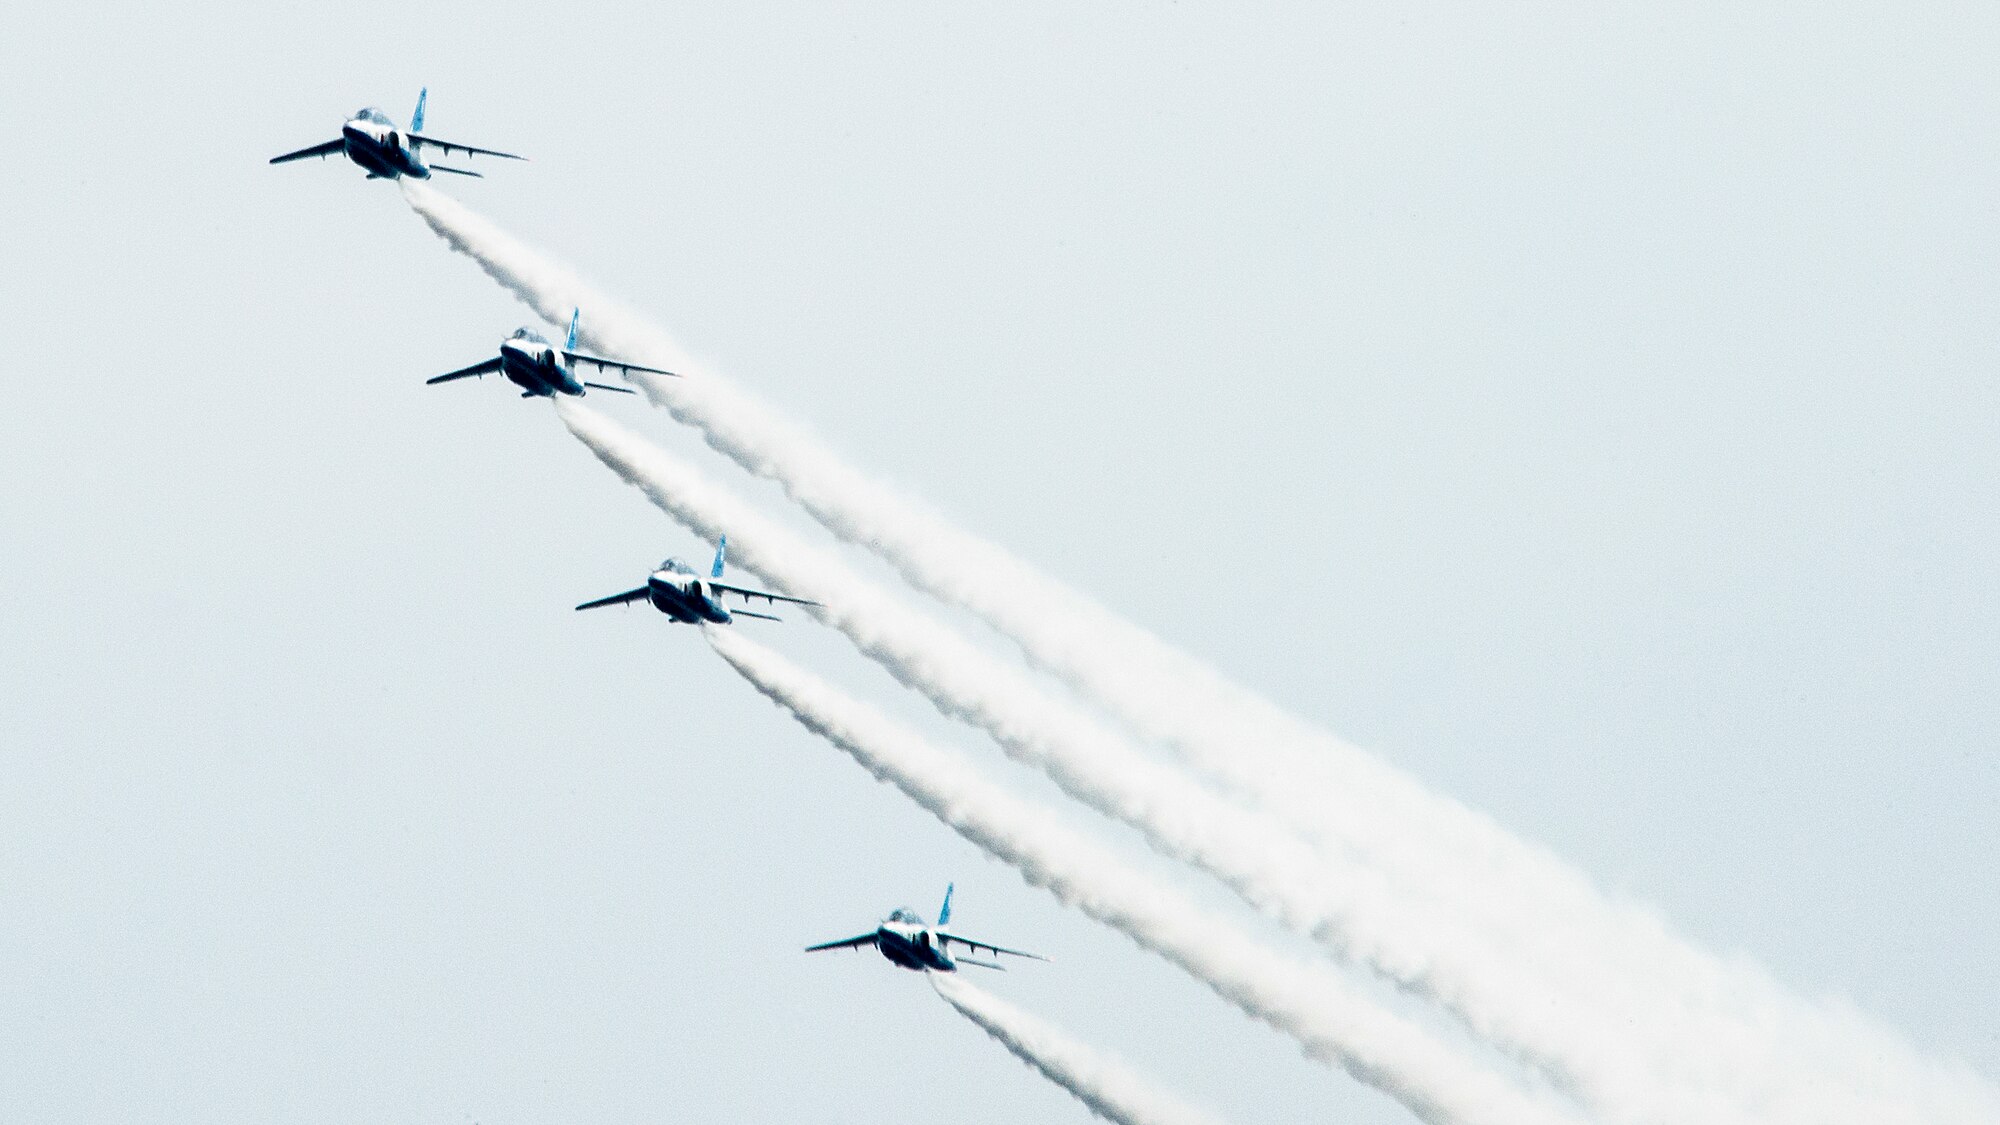 The Japan Air Self-Defense Force aerobatic team, Blue Impulse, leaves smoke-trails in the sky during the annual Iruma Air Show at Iruma Air Base, Japan, Nov. 3, 2013. Blue Impulse used the smoke-trails to sketch artistic patterns in the sky.  (U.S. Air Force photo by Airman 1st Class Soo C. Kim / Released)